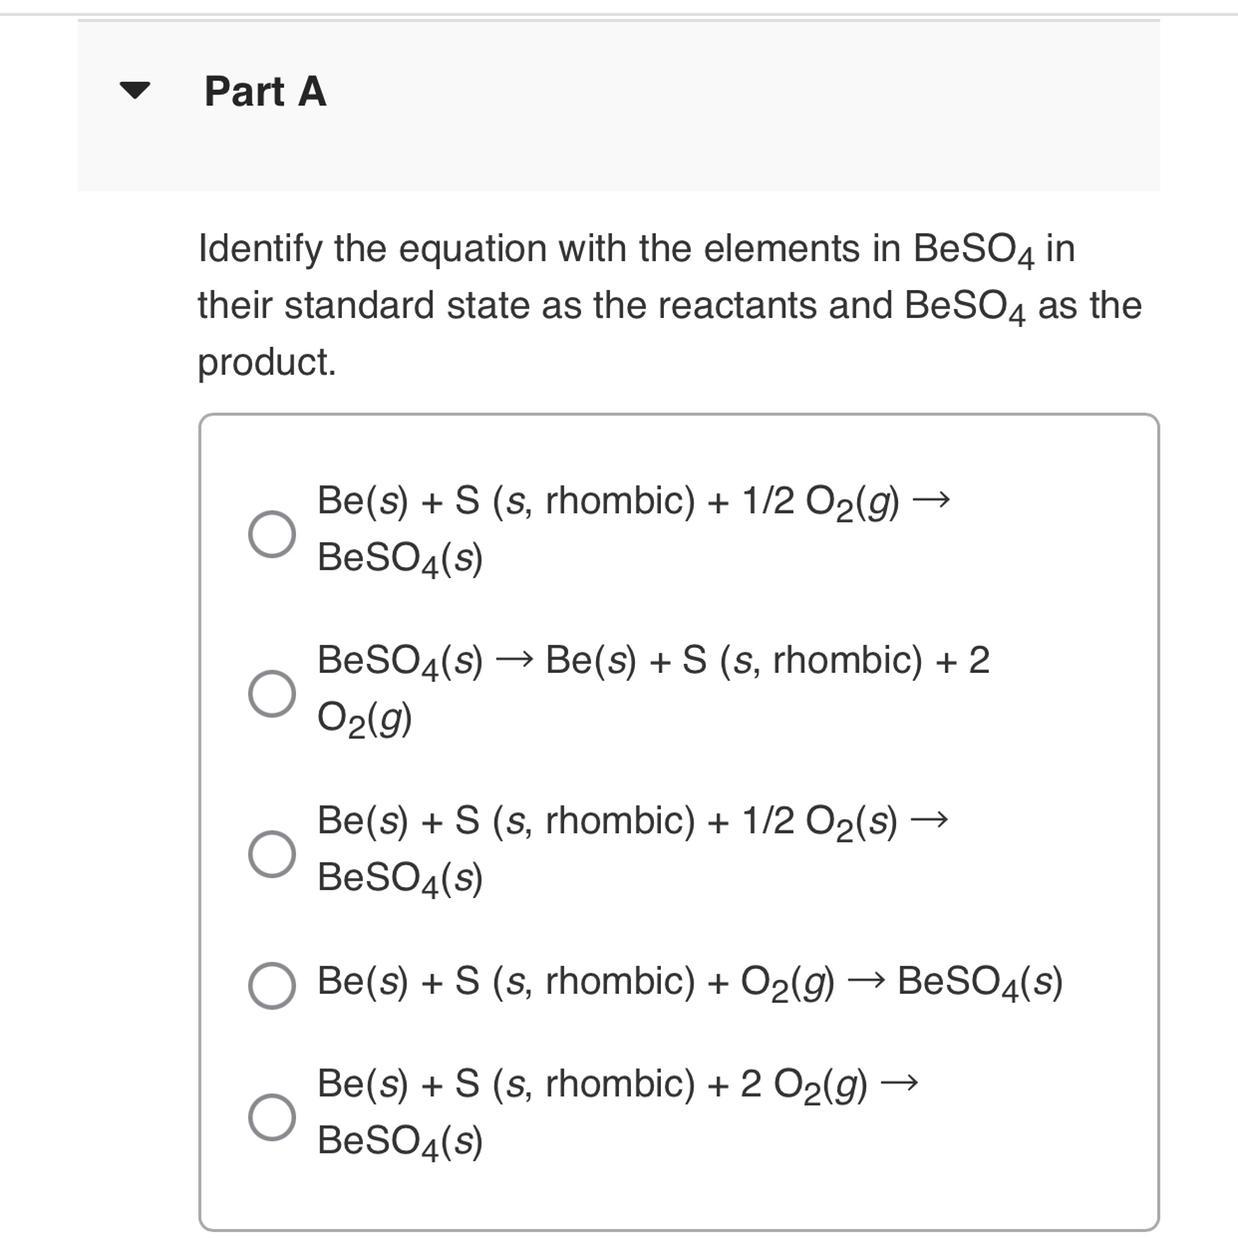 Identify The Equation With The Elements In BeSO4 In Their Standard State As The Reactants And BeSO4 As